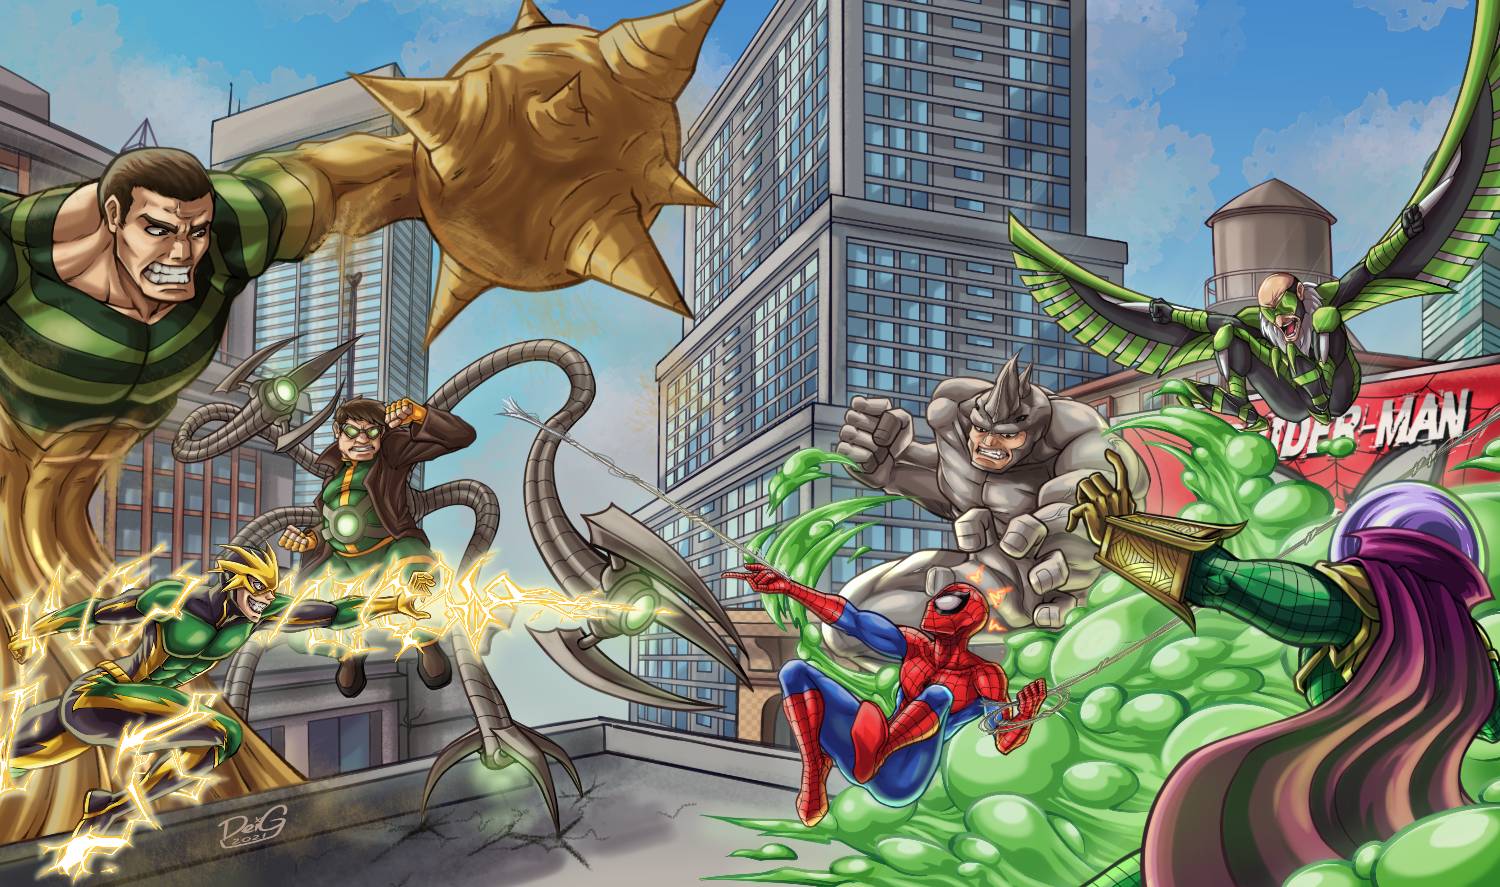 The Amazing Spiderman3: Sinister Six by Android32Fanart on DeviantArt